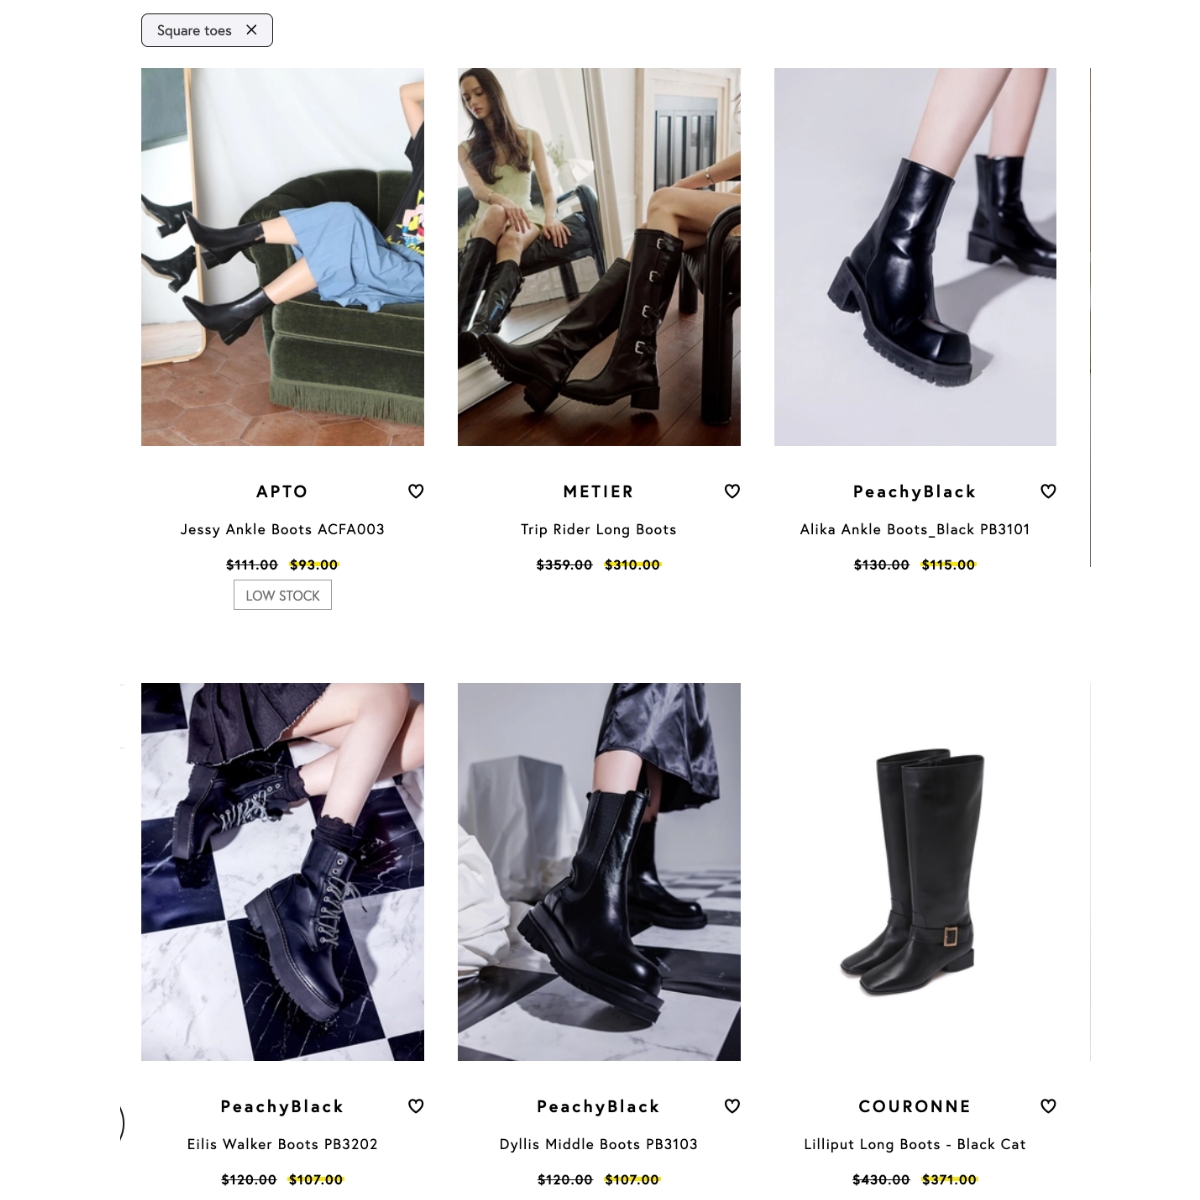 Search results for square boots using fashion AI